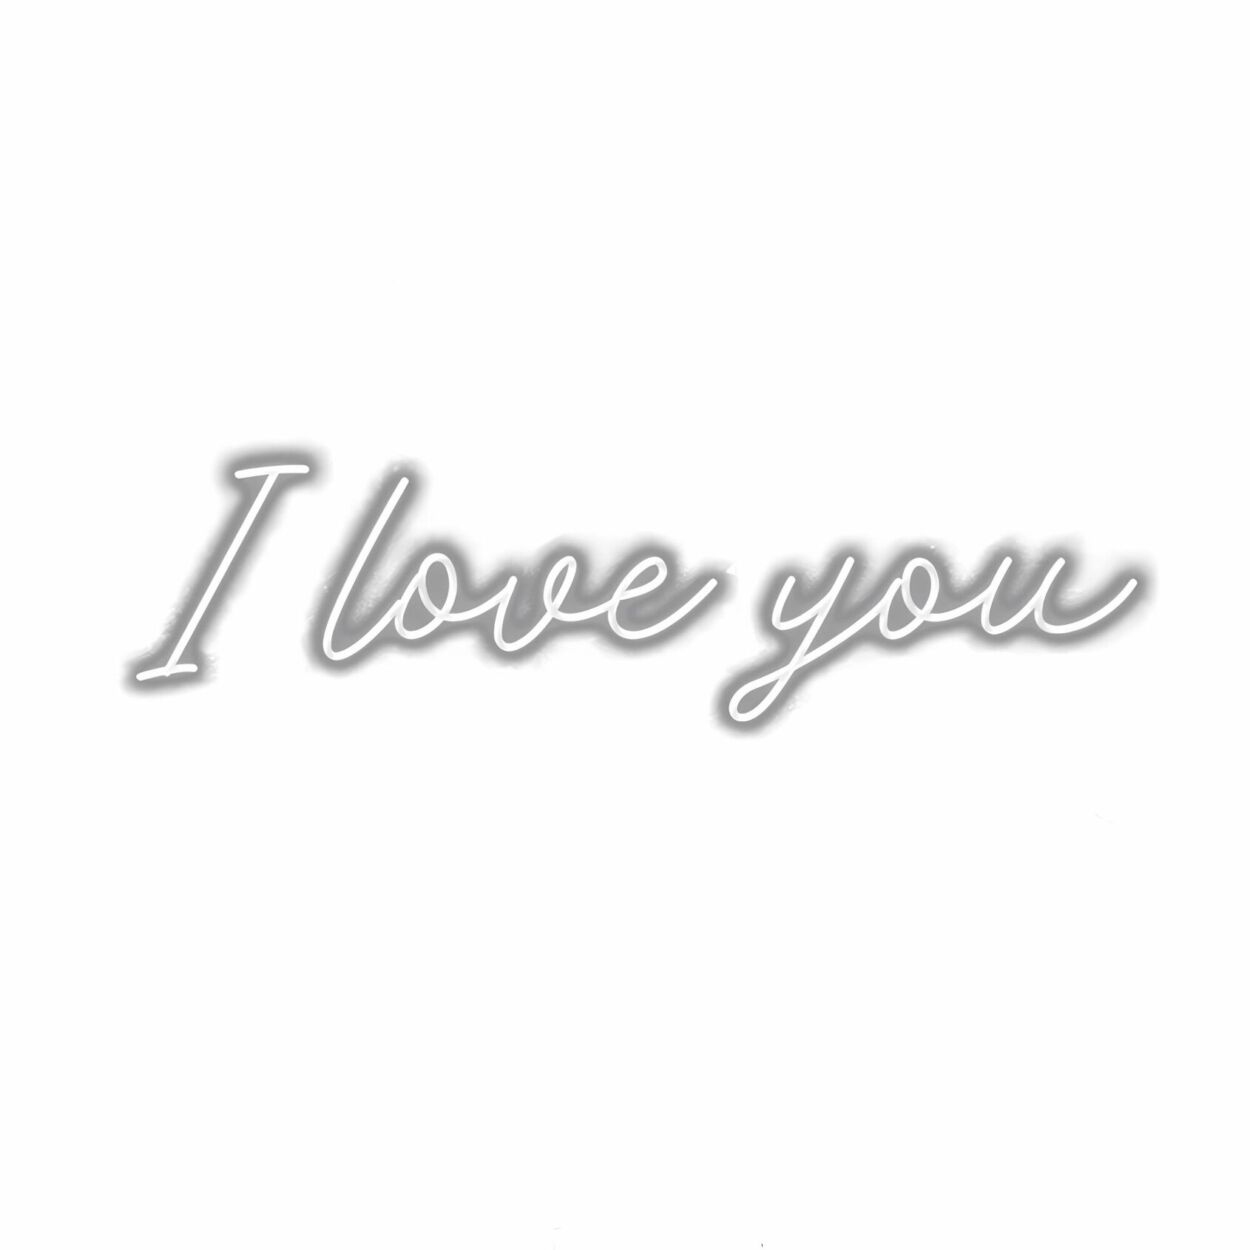 Text "I love you" with shadow effect.